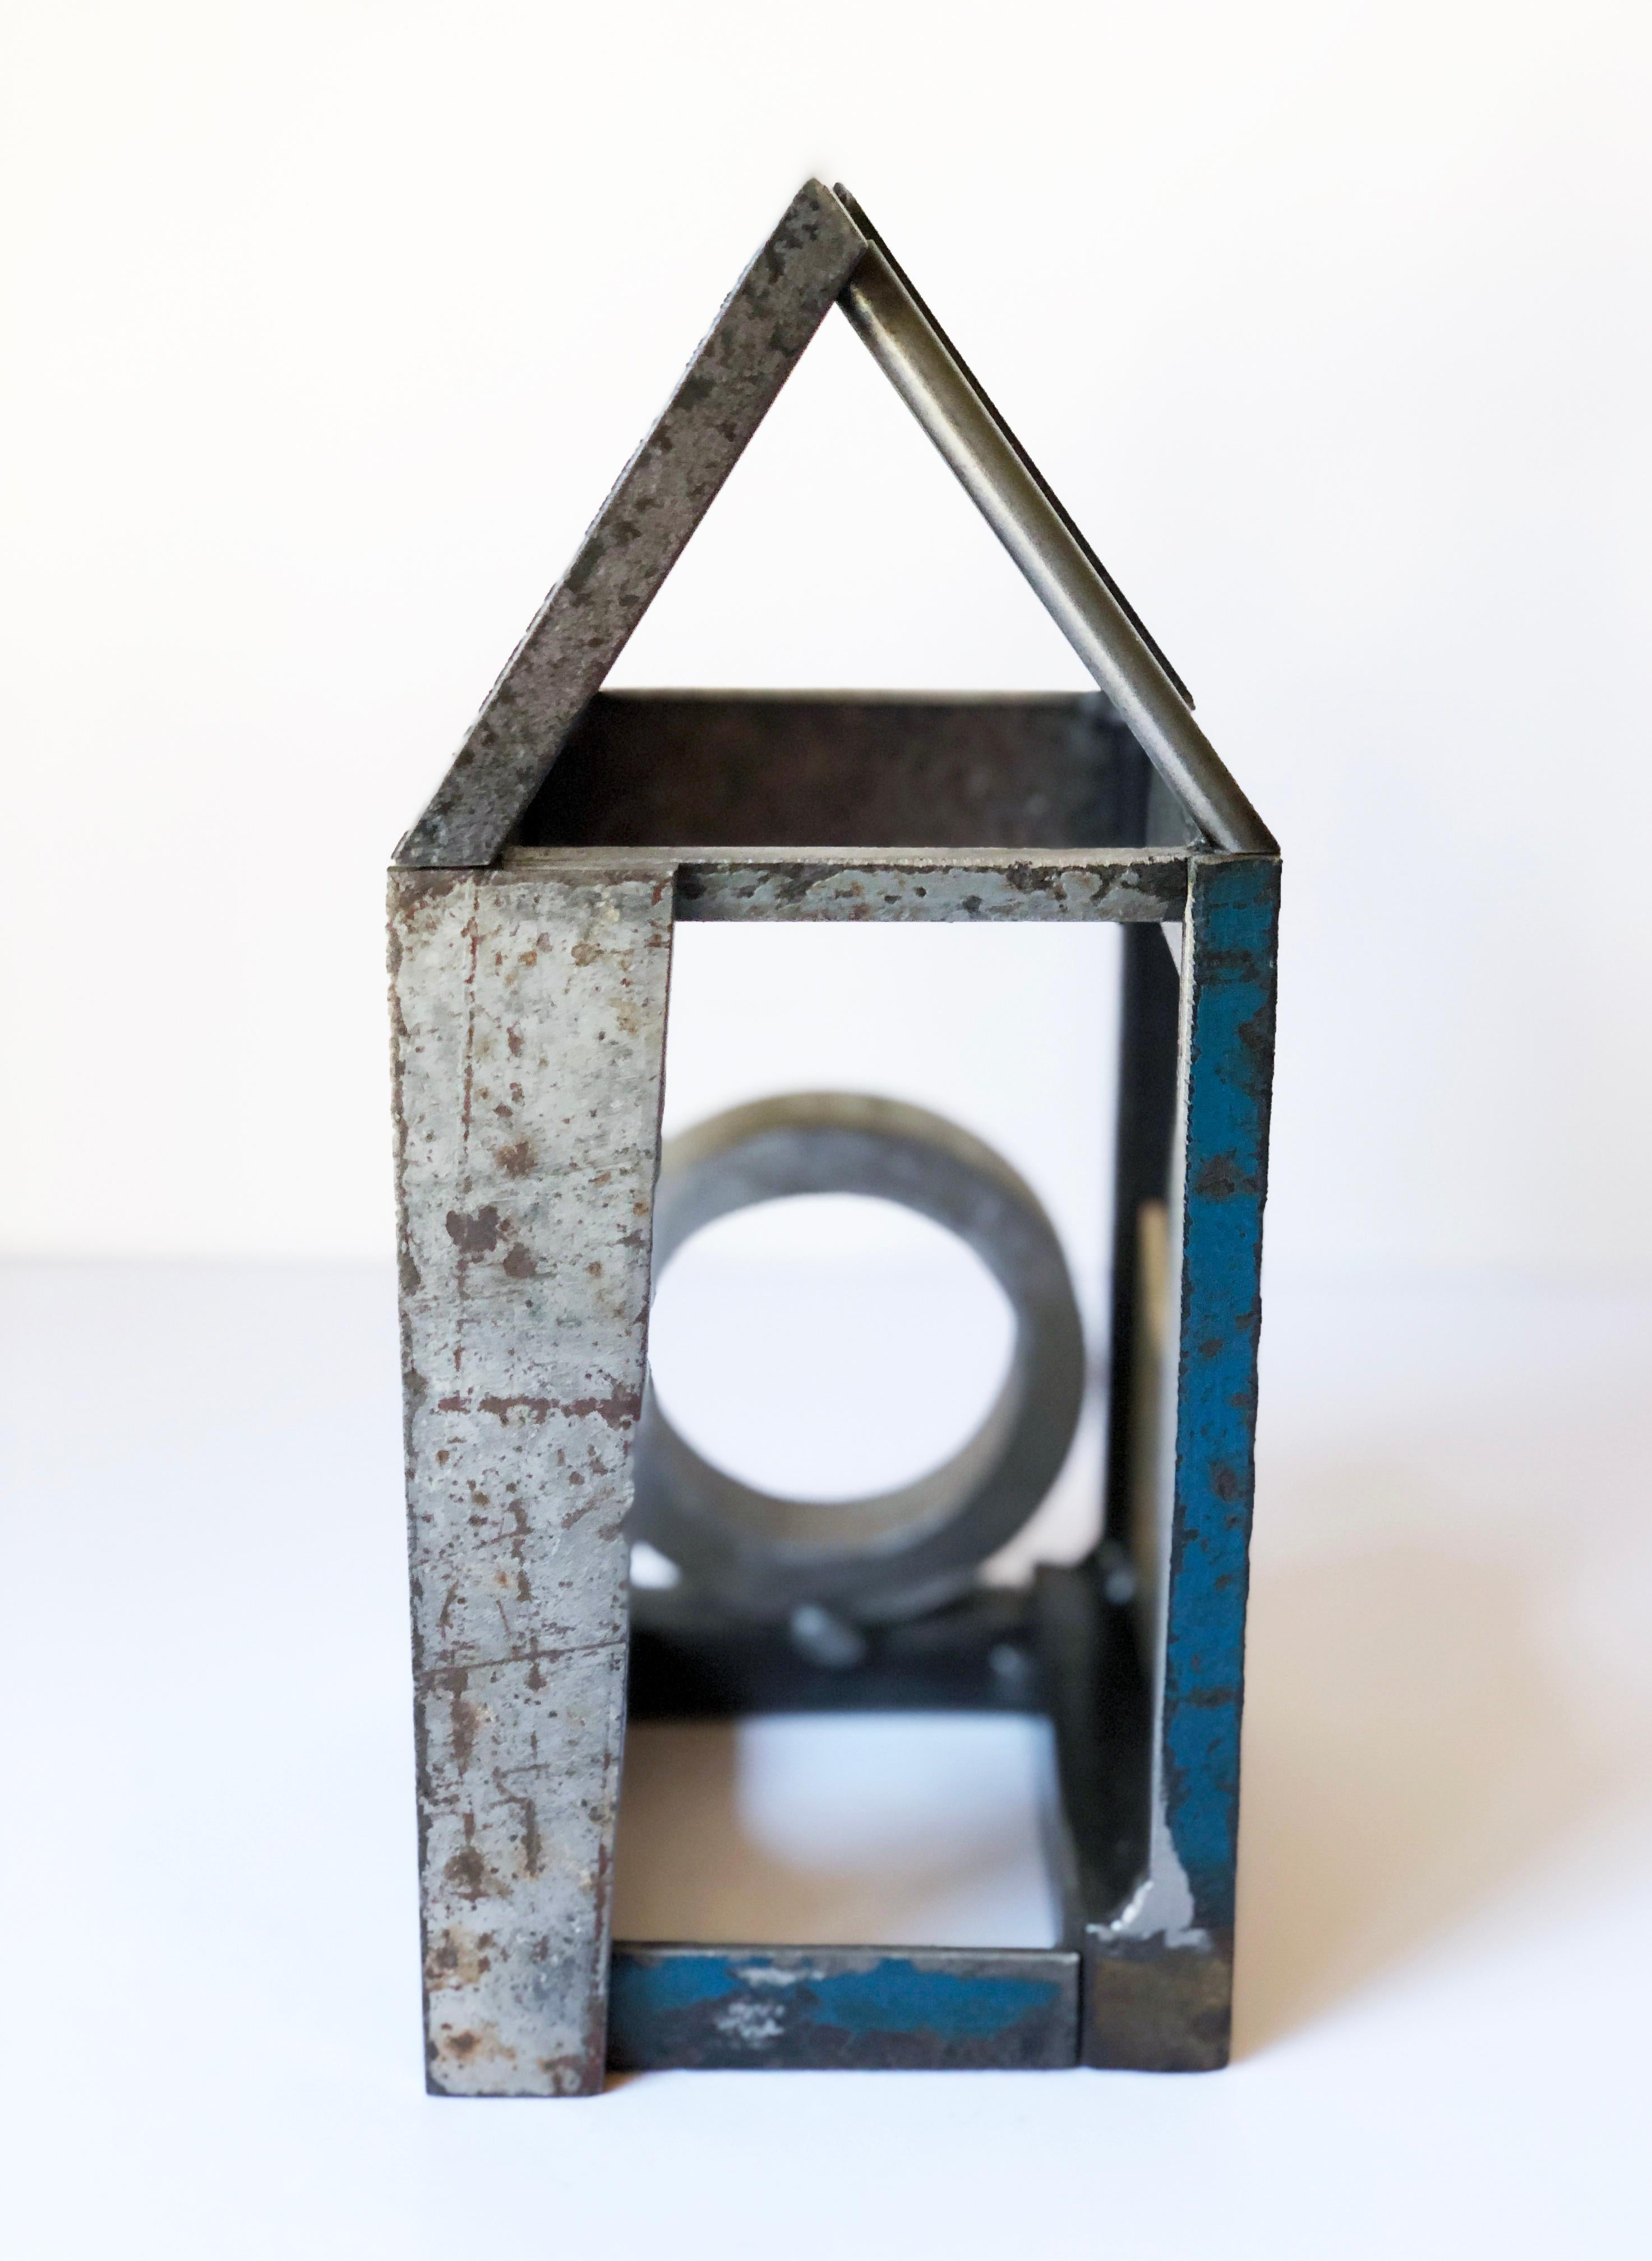 Contemporary Jim Rose Barn House Structure, Welded Steel Sculpture Made with Salvaged Steel